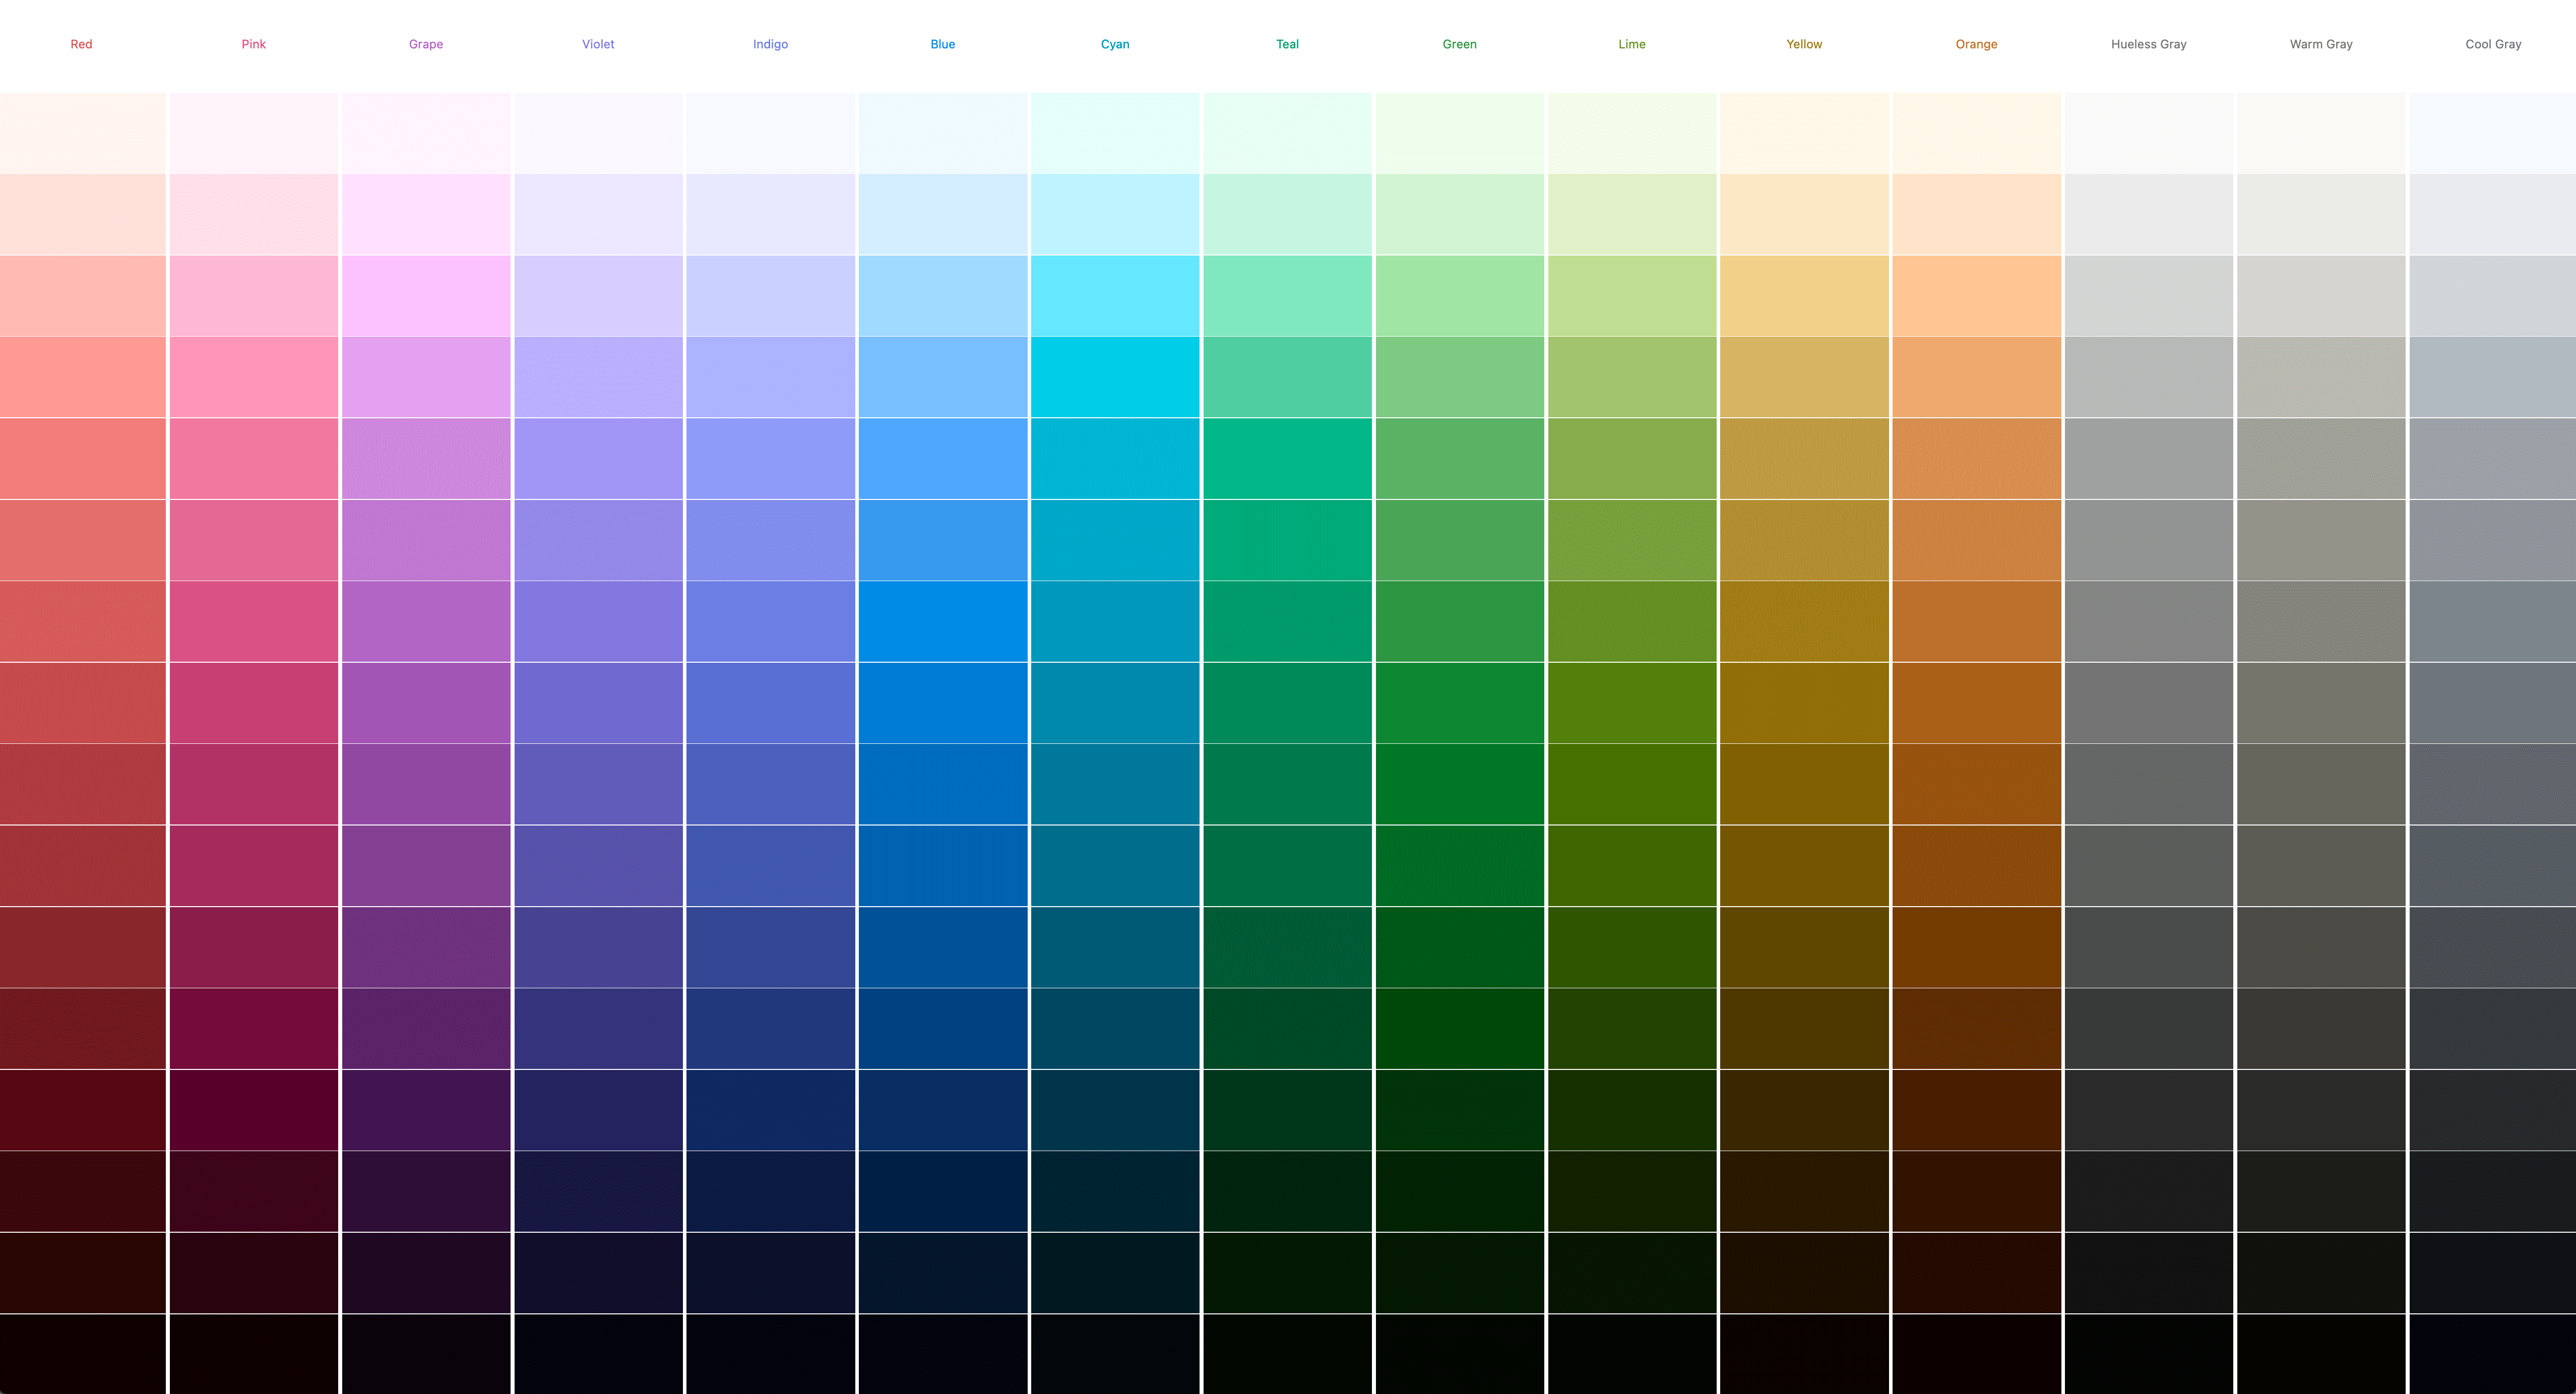 Screenshot of 15 palettes all generated dynamically by CSS.